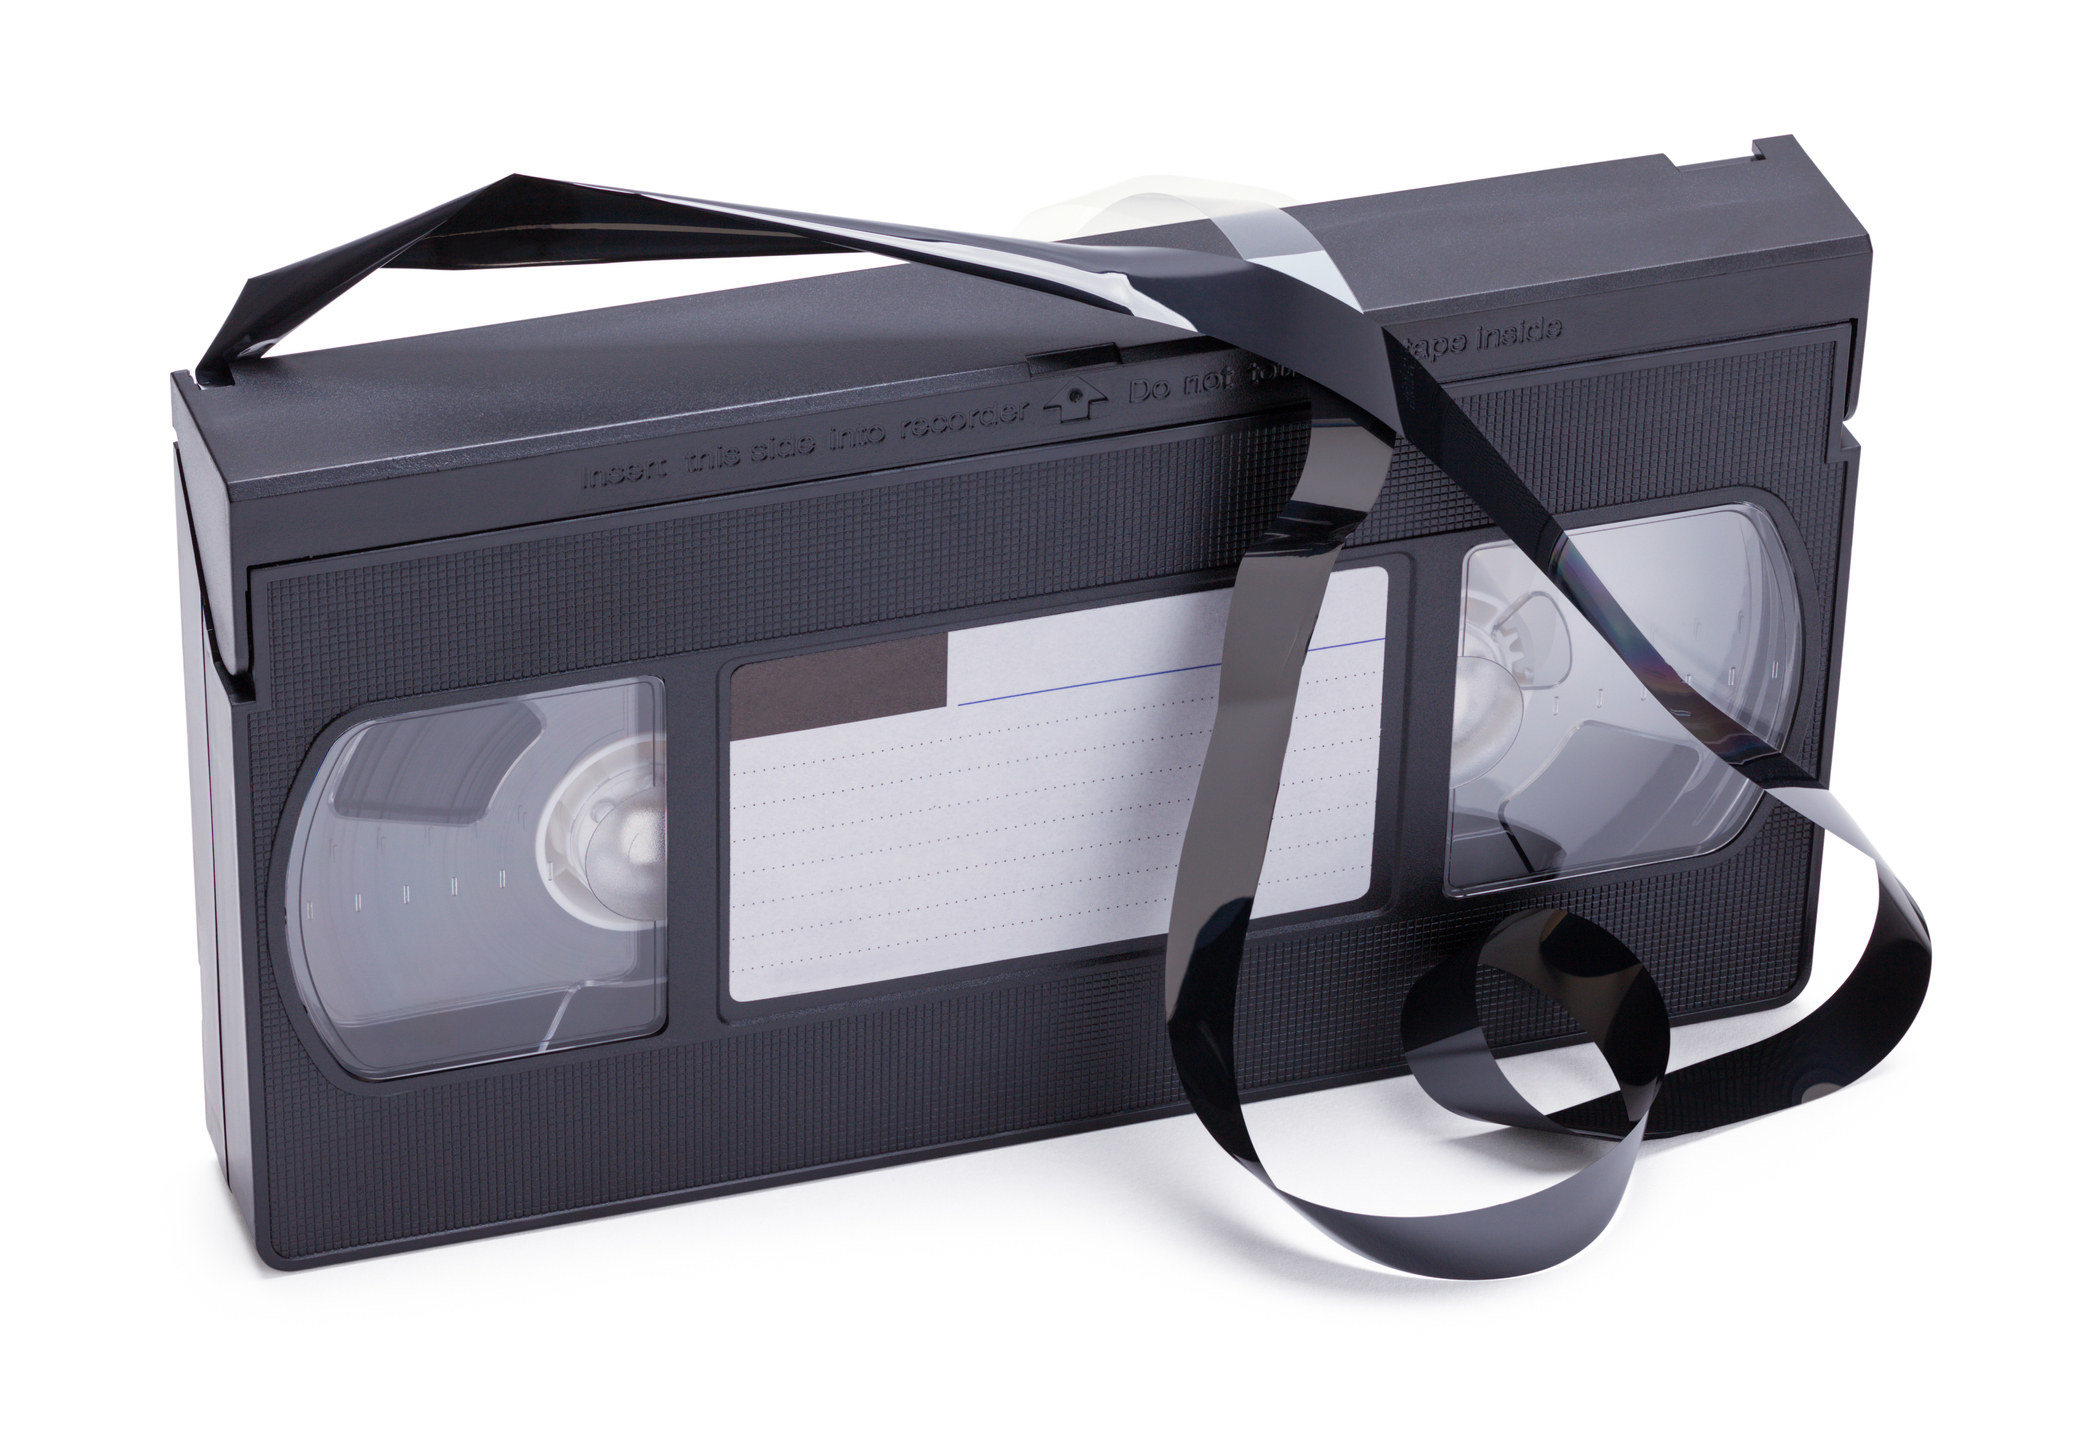 A VHS tape with ruined tape pulled out